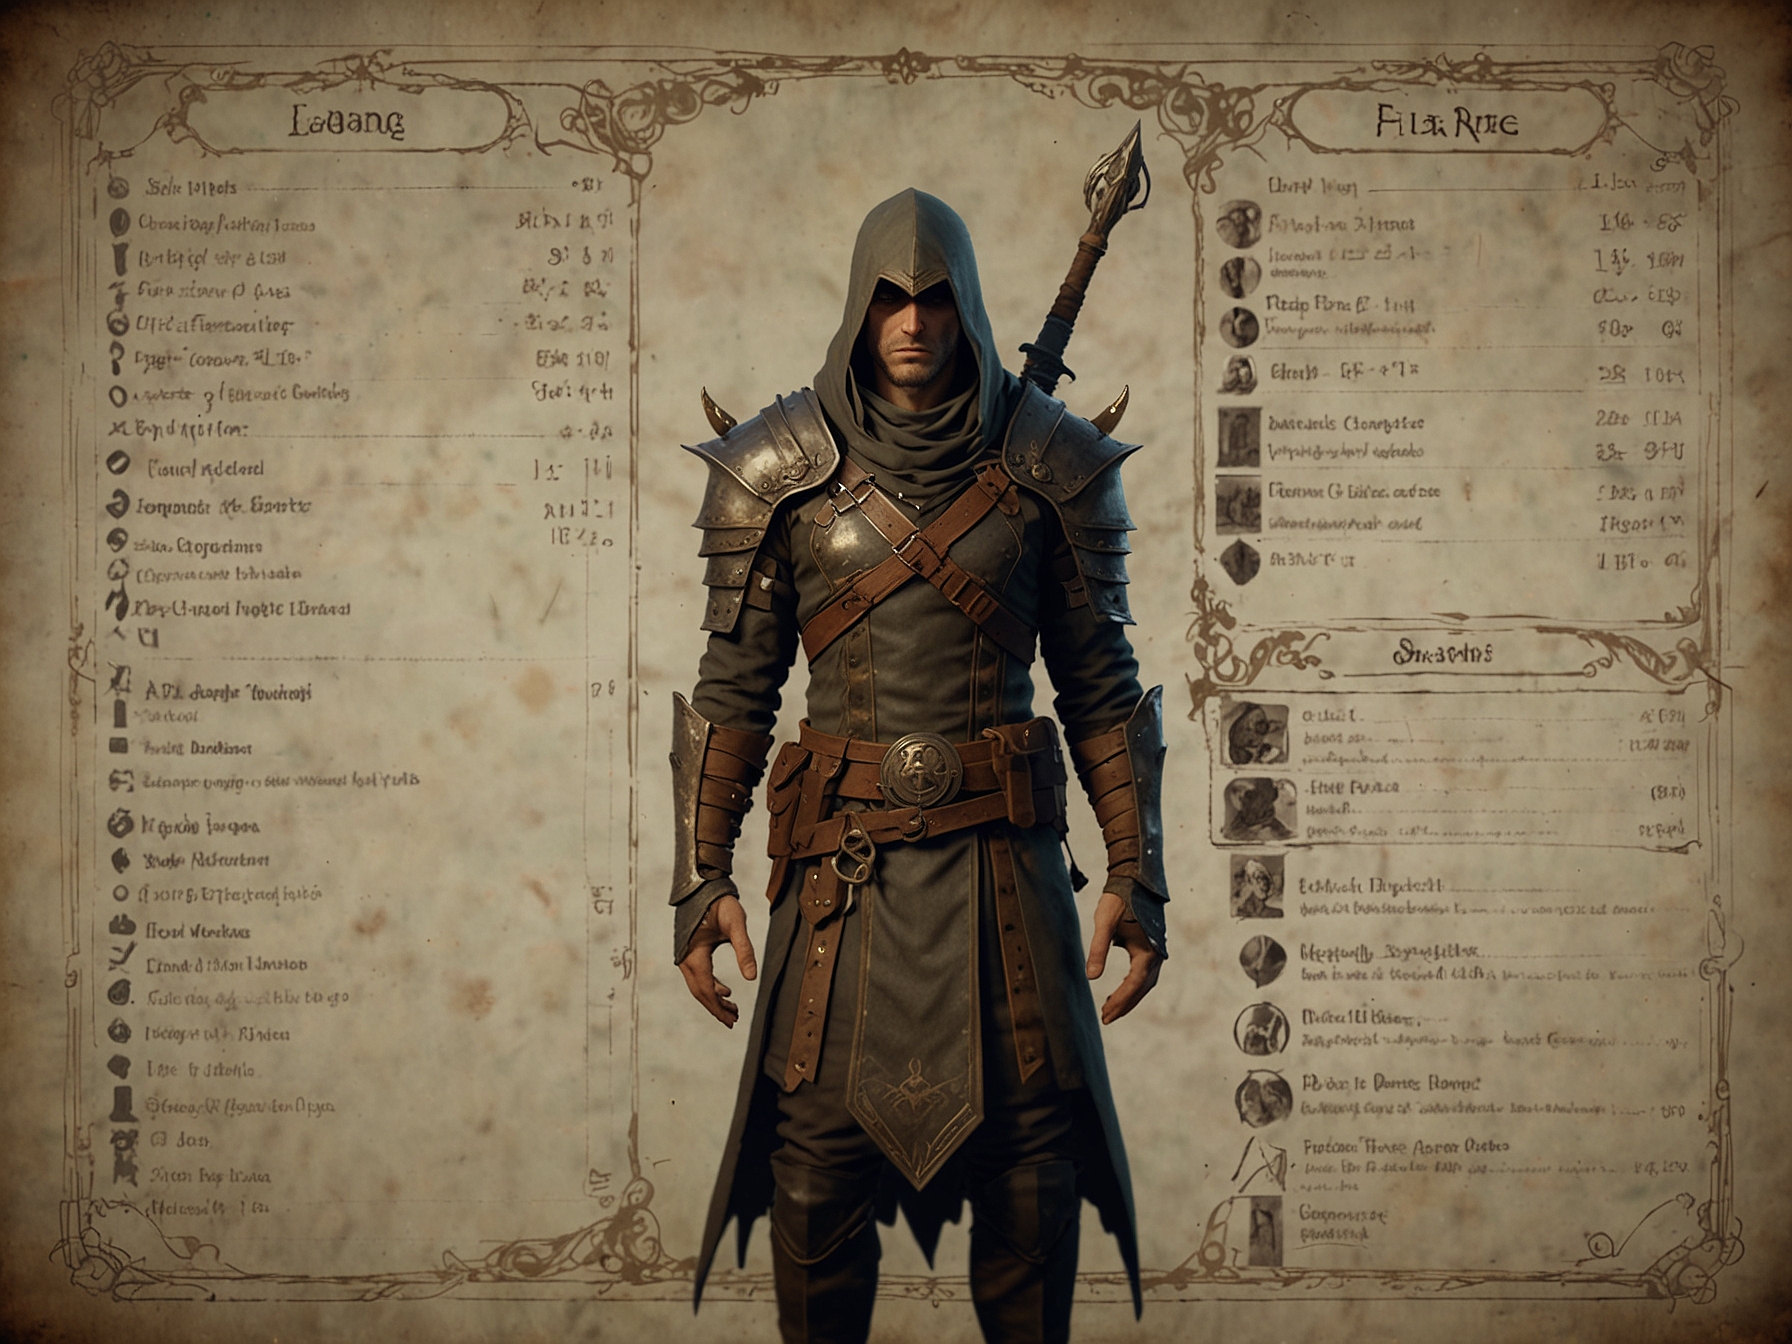 A screenshot of a character build menu in Elden Ring displaying the increments and diminishing returns of various stats such as Vigor, Mind, and Endurance up to their respective soft caps.